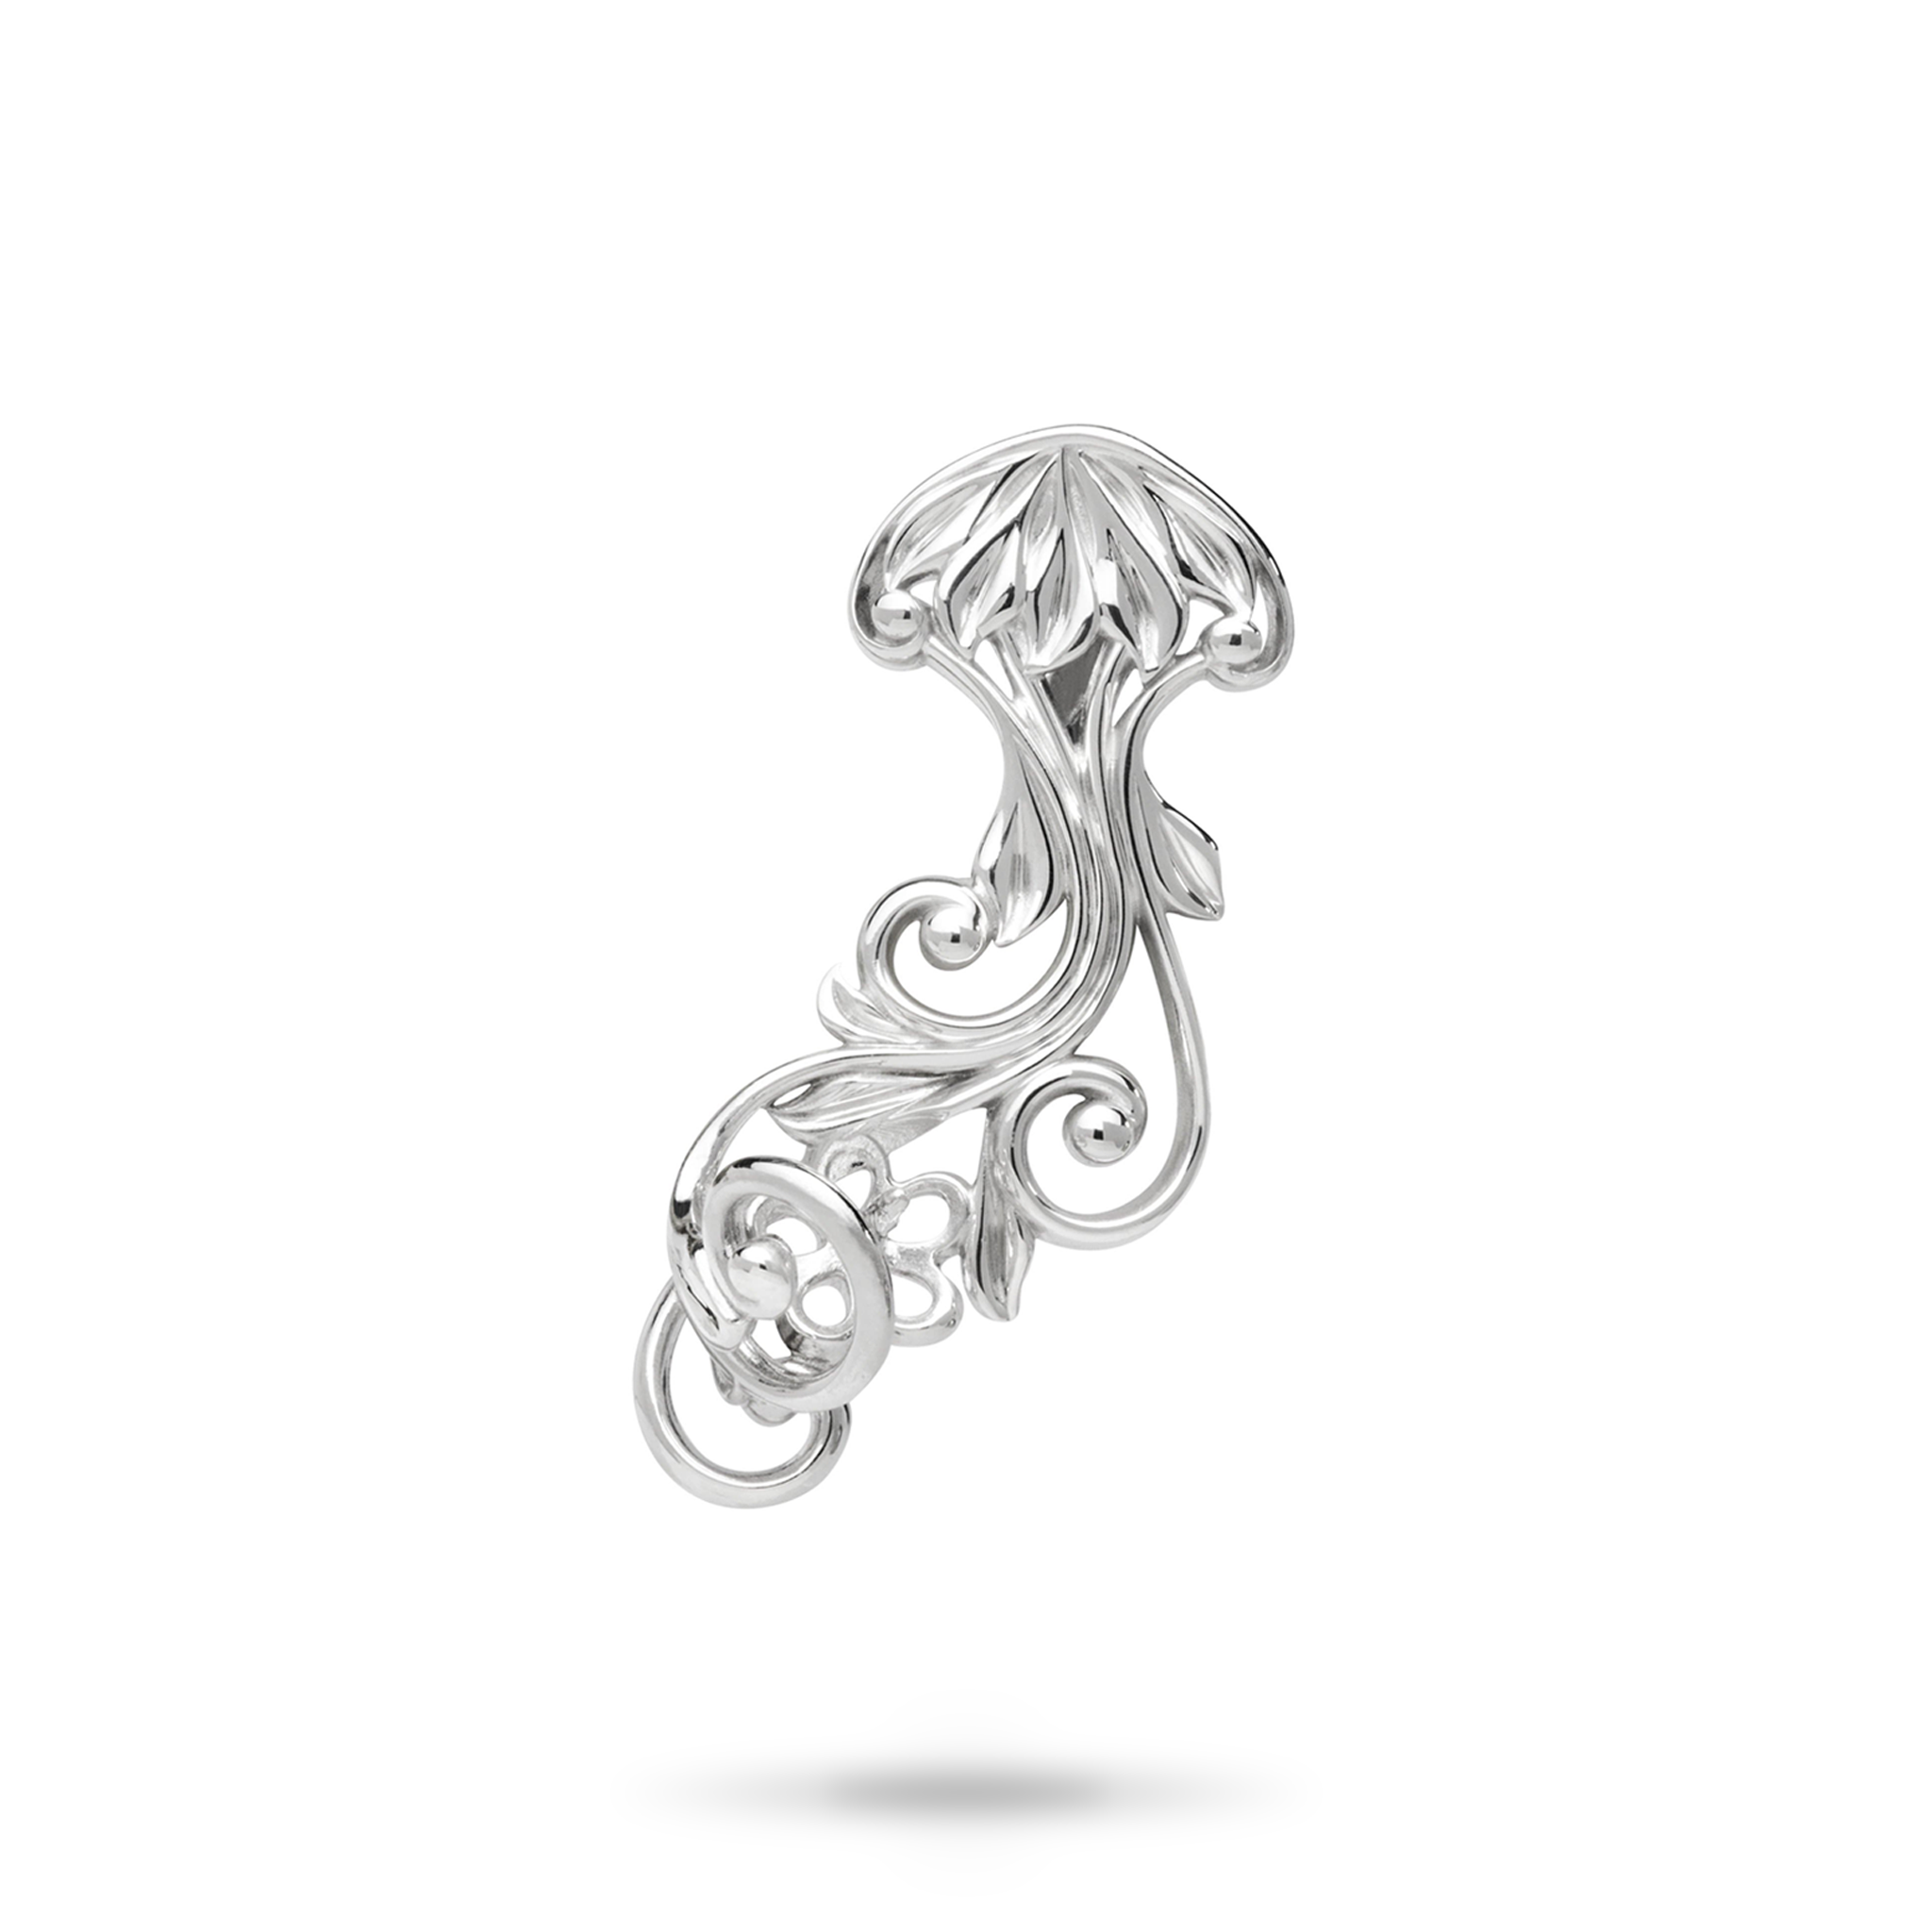 Pick A Pearl Living Heirloom Jellyfish Pendant in Sterling Silver - 29mm